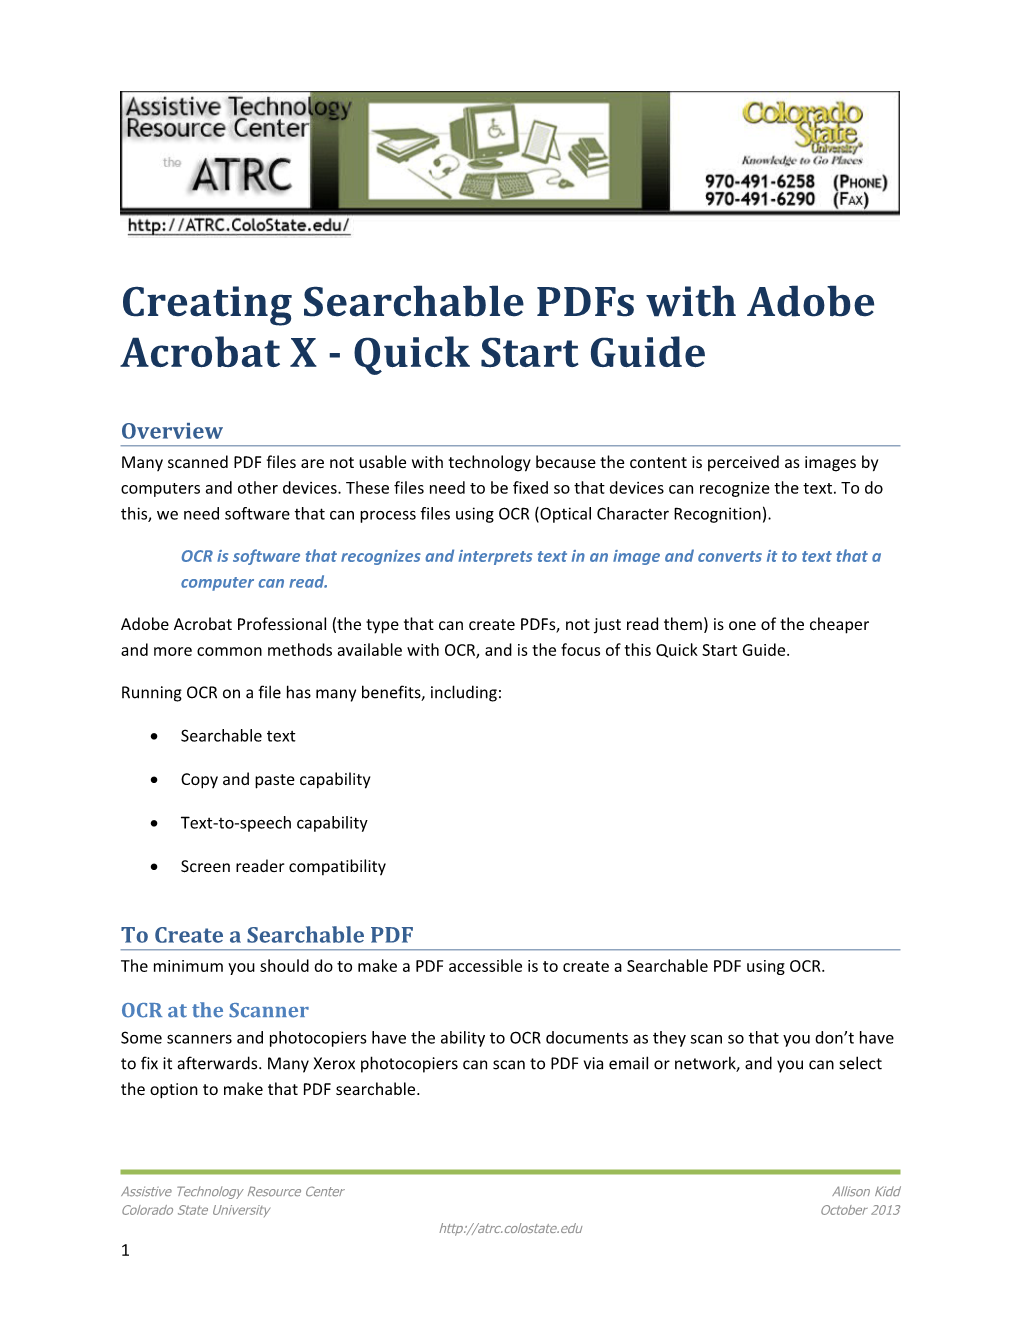 Creating Searchable Pdfs with Adobe Acrobat X - Quick Start Guide